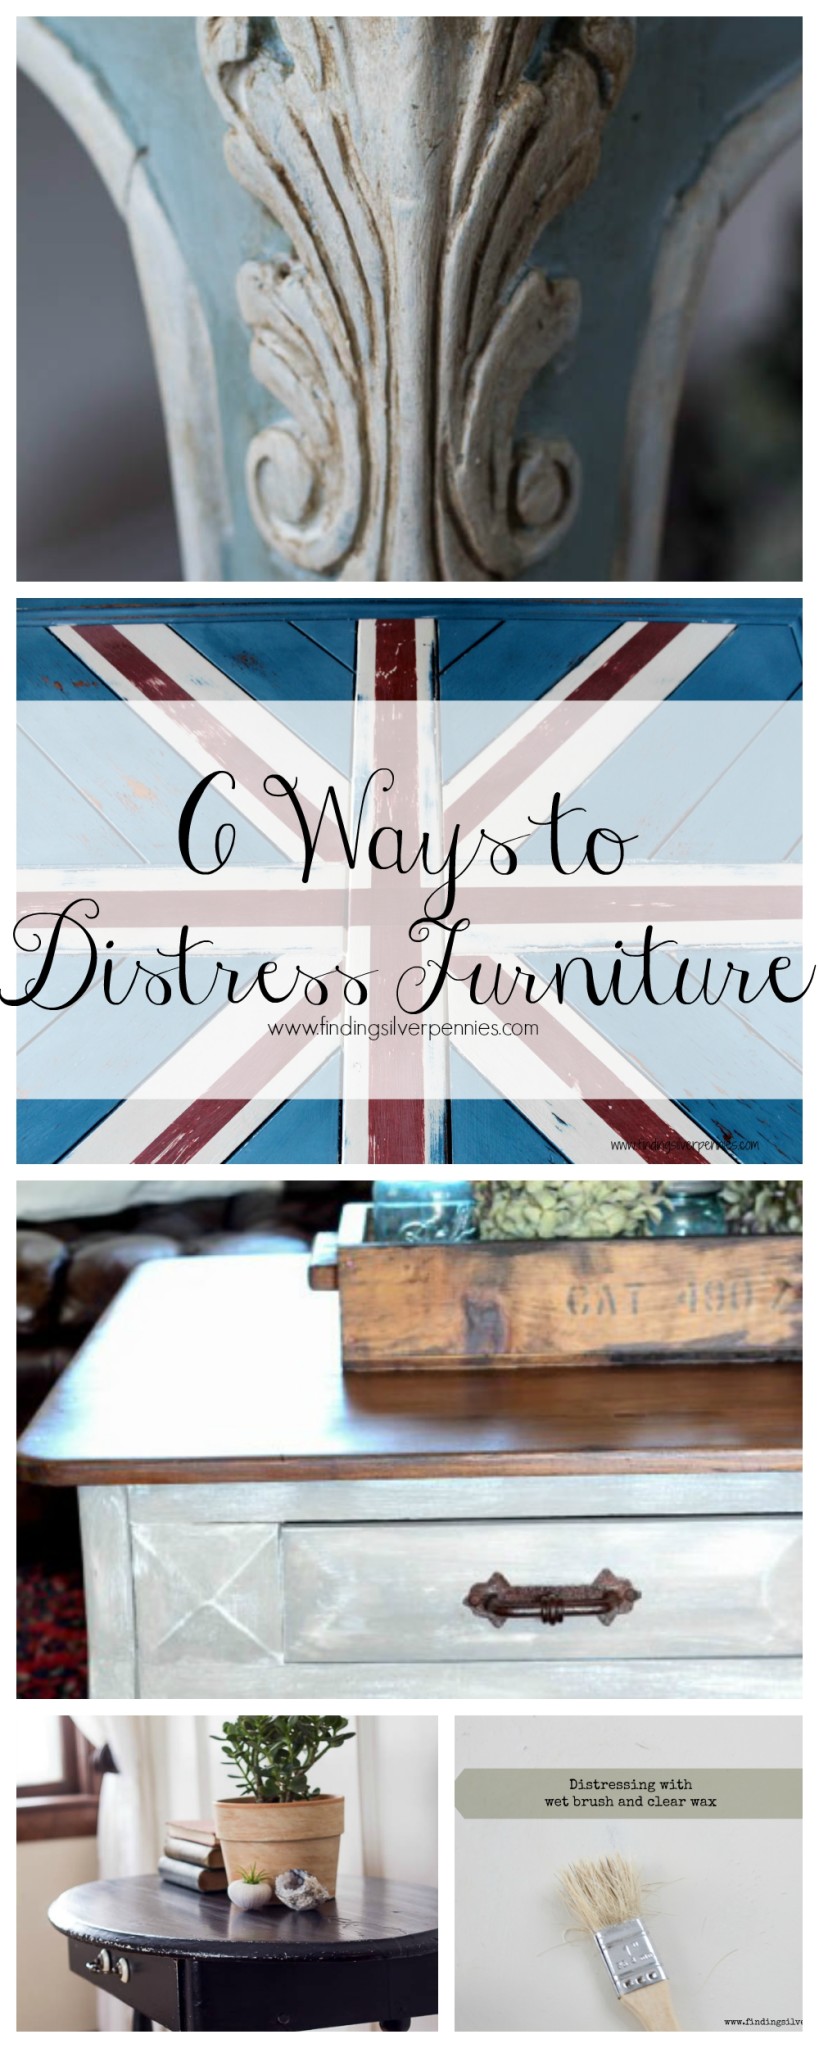 So Distressing 6 Ways To Distress Furniture Finding Silver Pennies